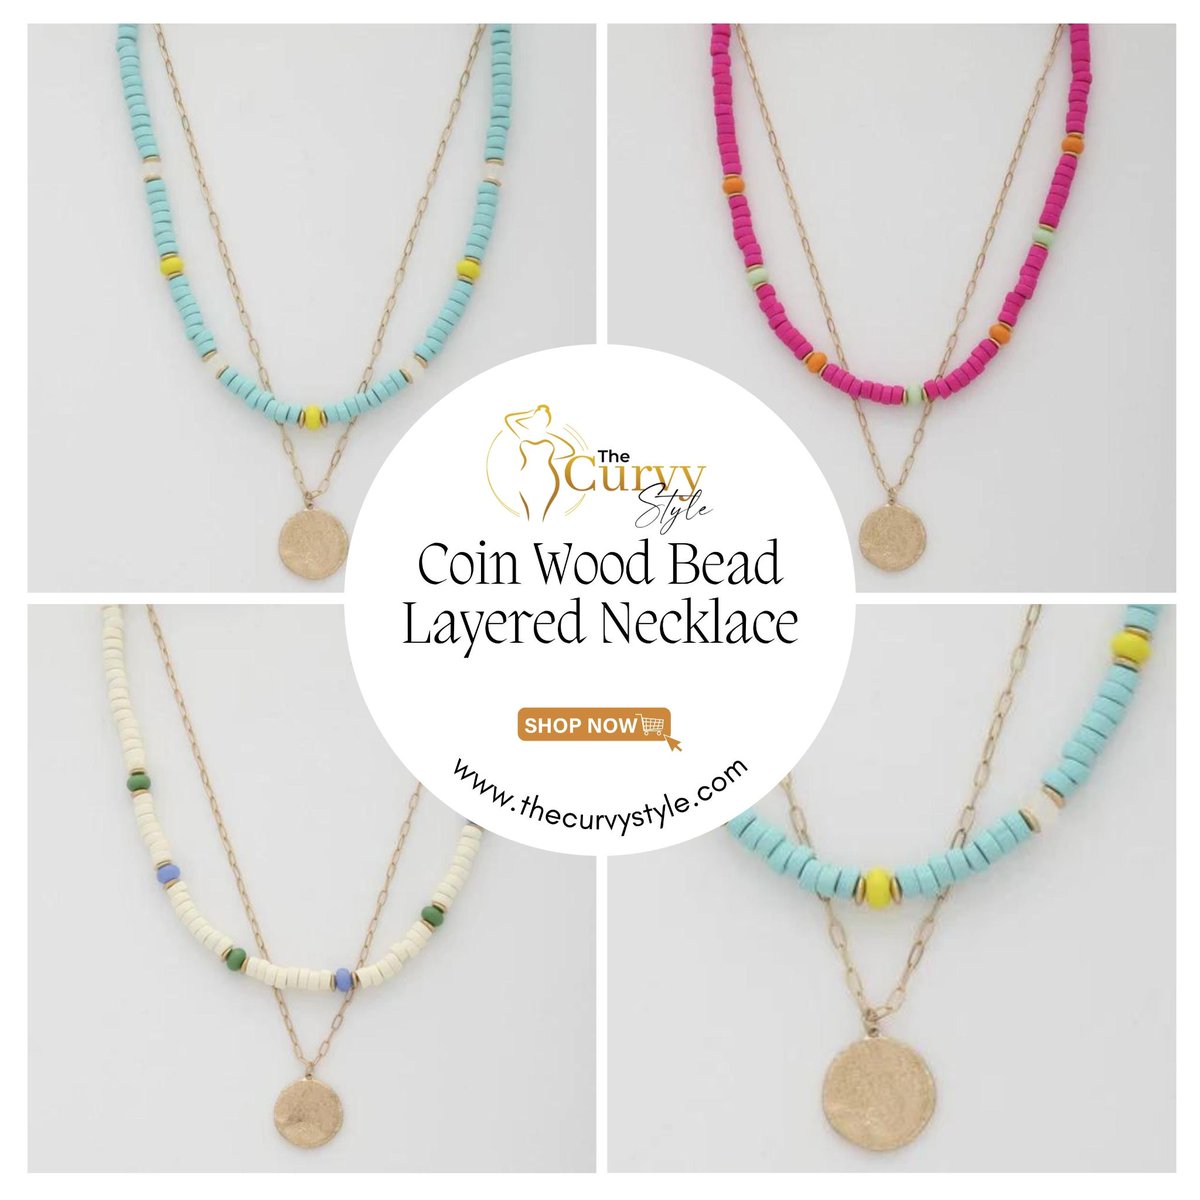 The combination of delicate coins and natural wooden beads creates a unique and versatile accessory that effortlessly elevates any look.

Shop now!
thecurvystyle.com/products/fbj2-…
.
#LayeredNecklace #BohoJewelry #CoinNecklace